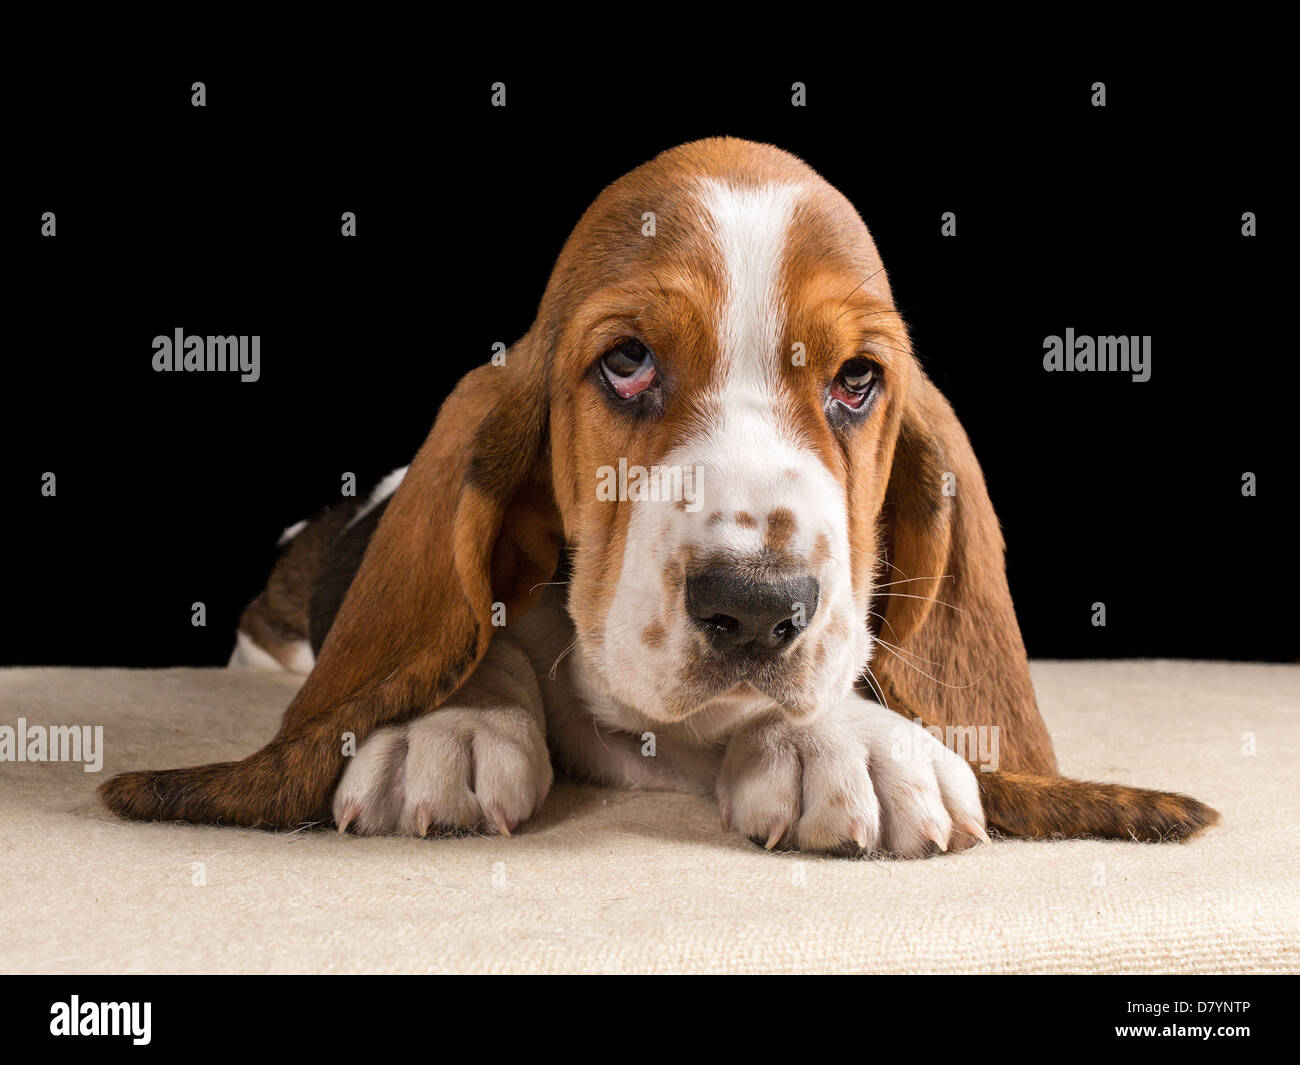 Tri-coloured Basset hound puppy lying down looking sad Stock Photo